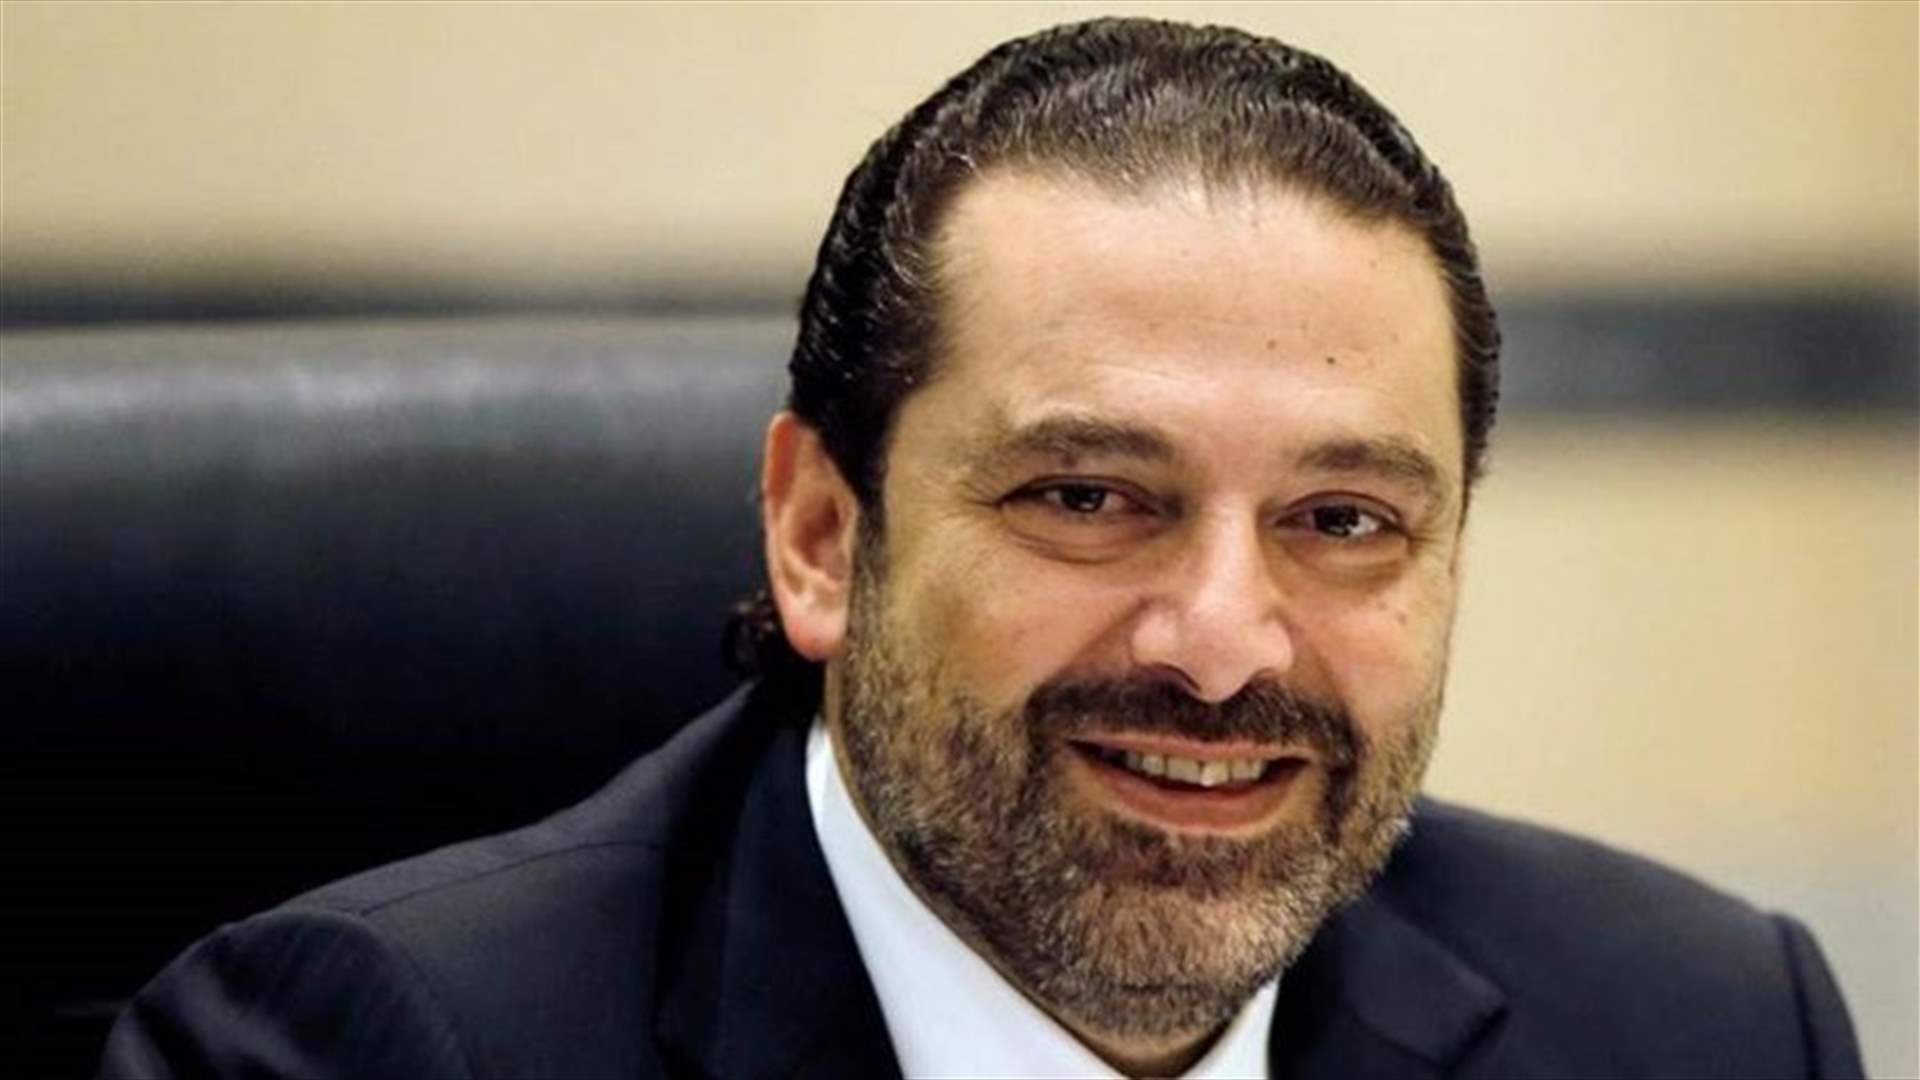 Hariri says will meet with Aoun soon and nothing prevents him from meeting Bassil